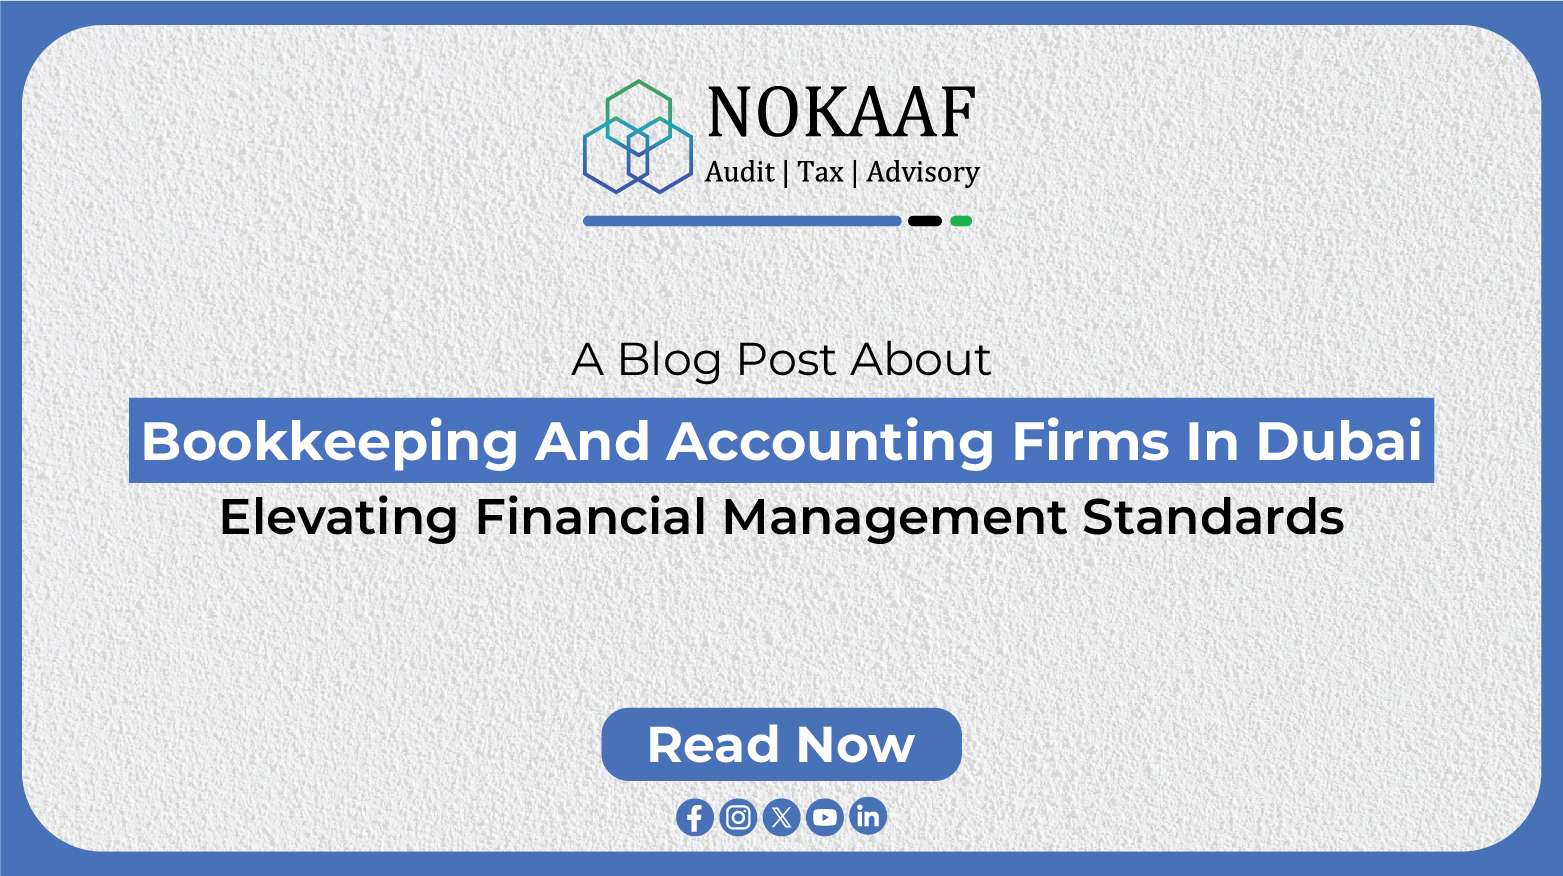 Bookkeeping And Accounting Firms In Dubai